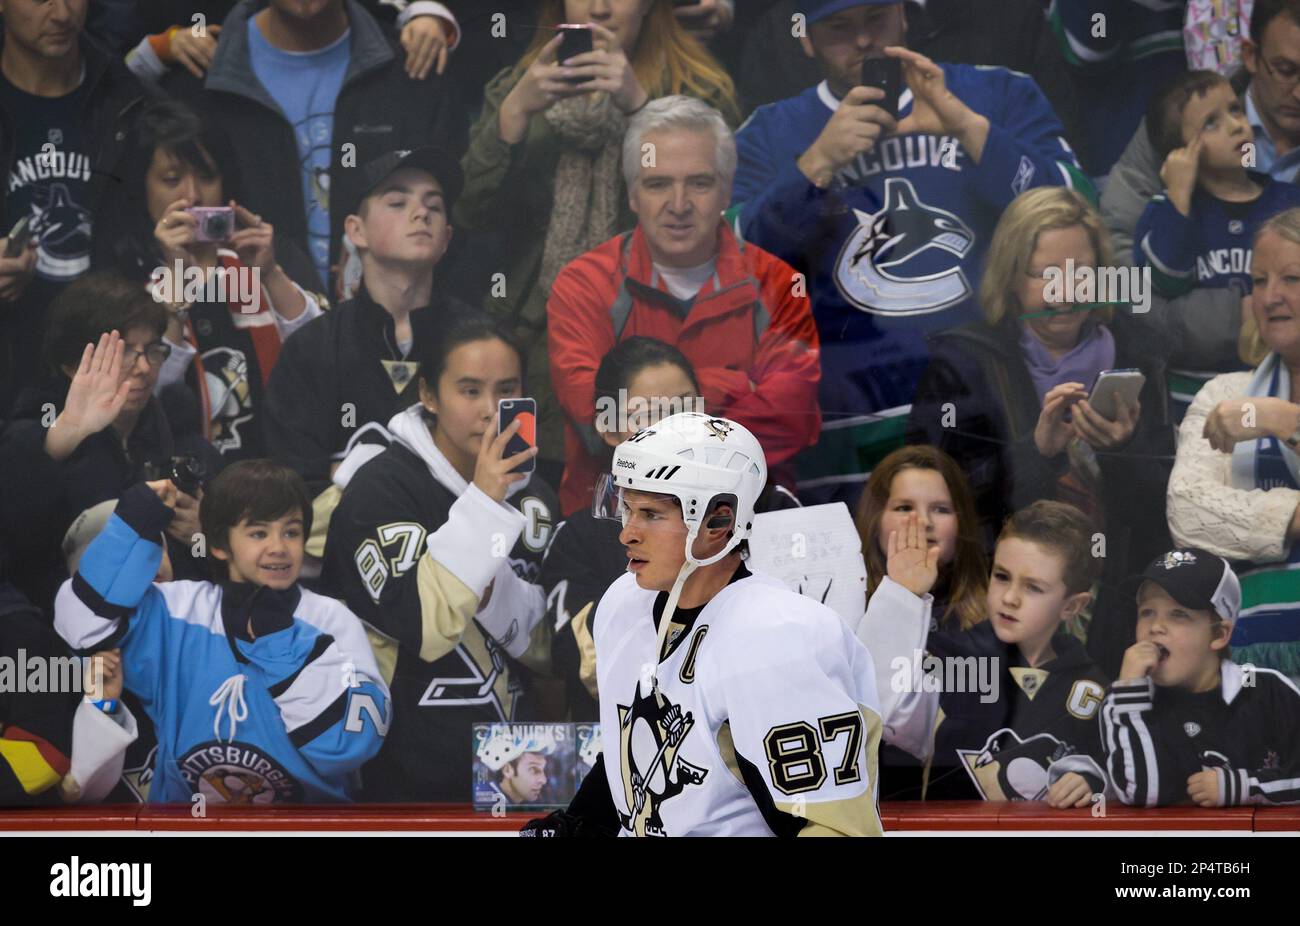 History shows Sidney Crosby could have stood up to racial injustice